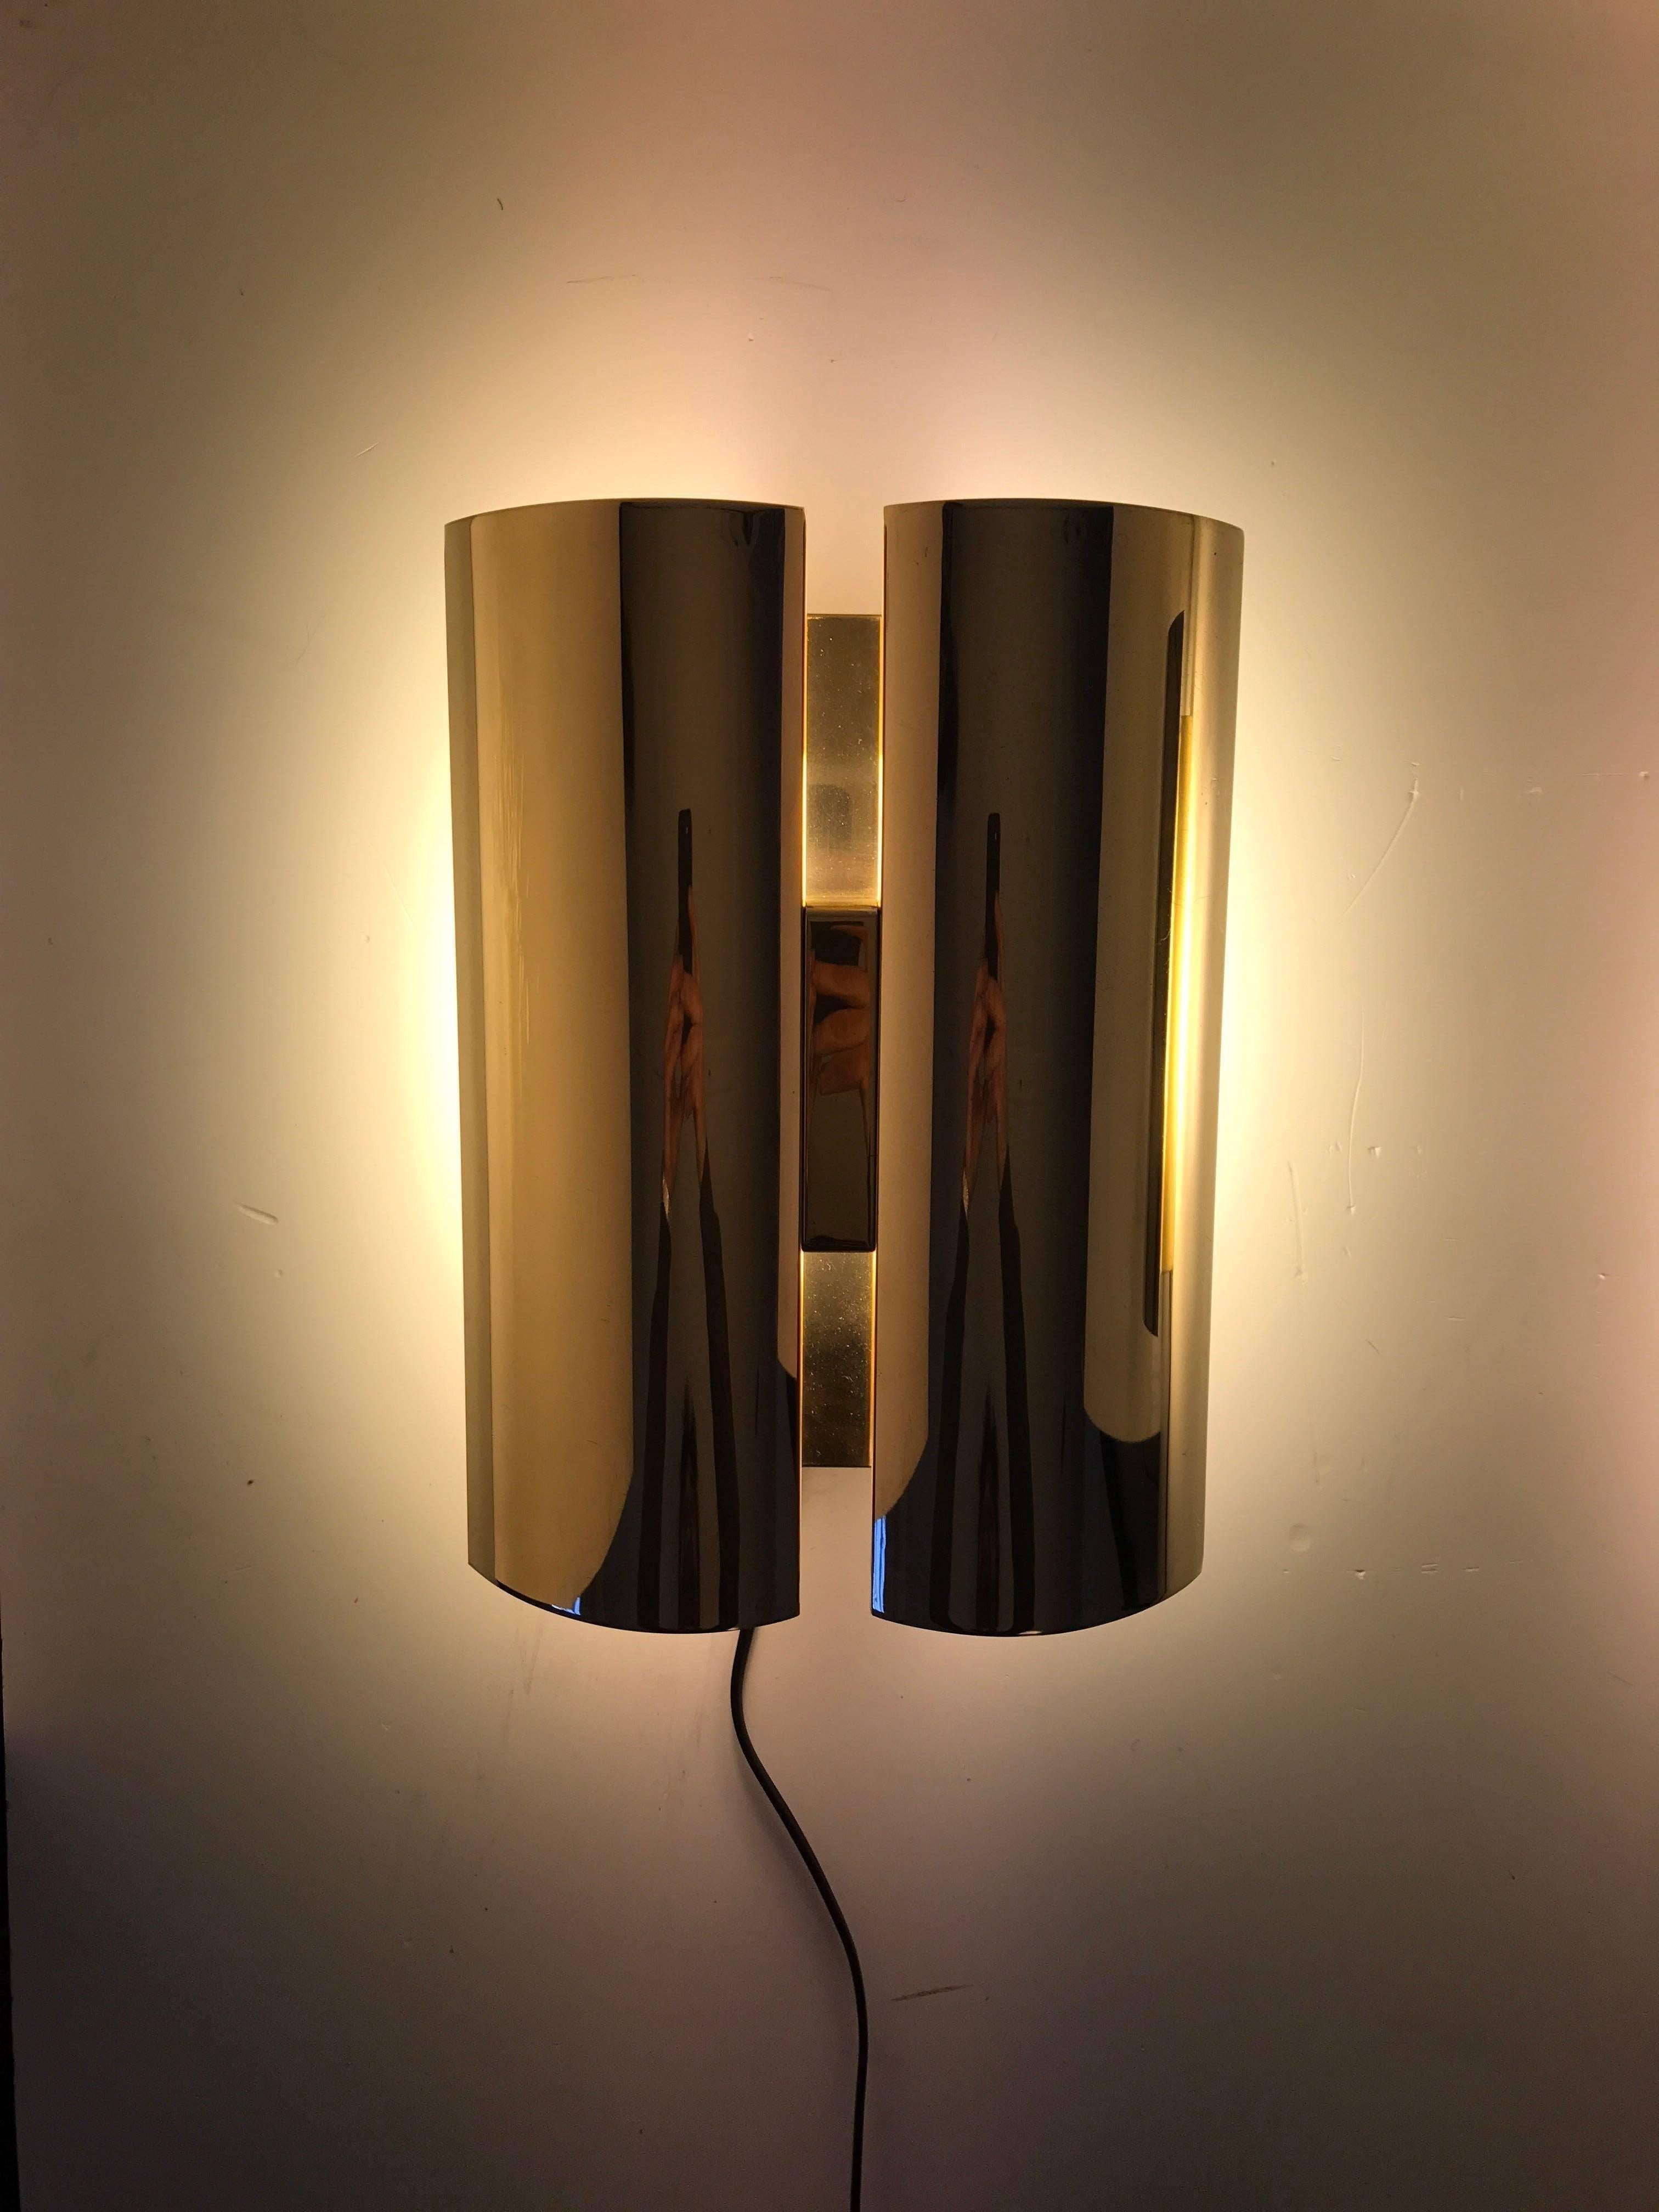 Rare Pair Swedish Fagerhult Brass Wall Sconces Late 20th Century.
A beautiful and rare pair wall sconces made by Fagerhult Belysning AB. The sconces have compact fluorescent tubes 2pin G23 socket. New in box extra flourescent tubes will come extra